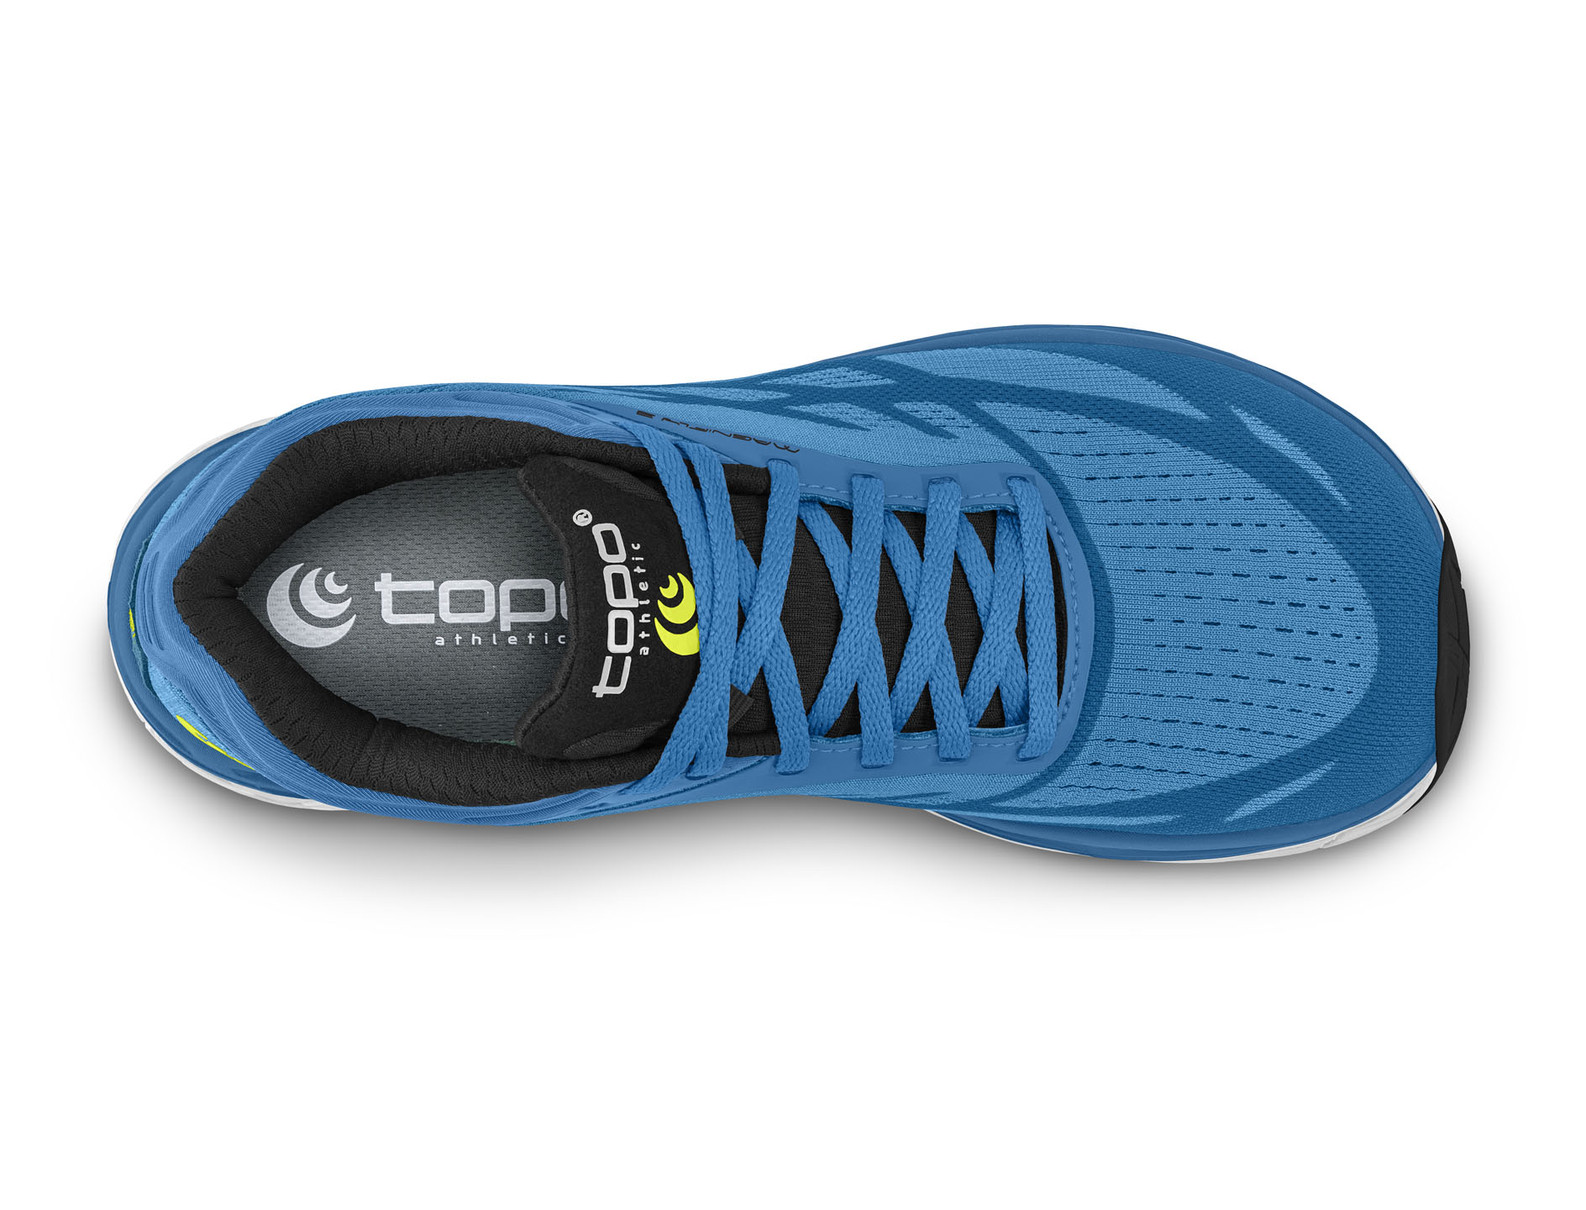 Topo Athletic Shoes